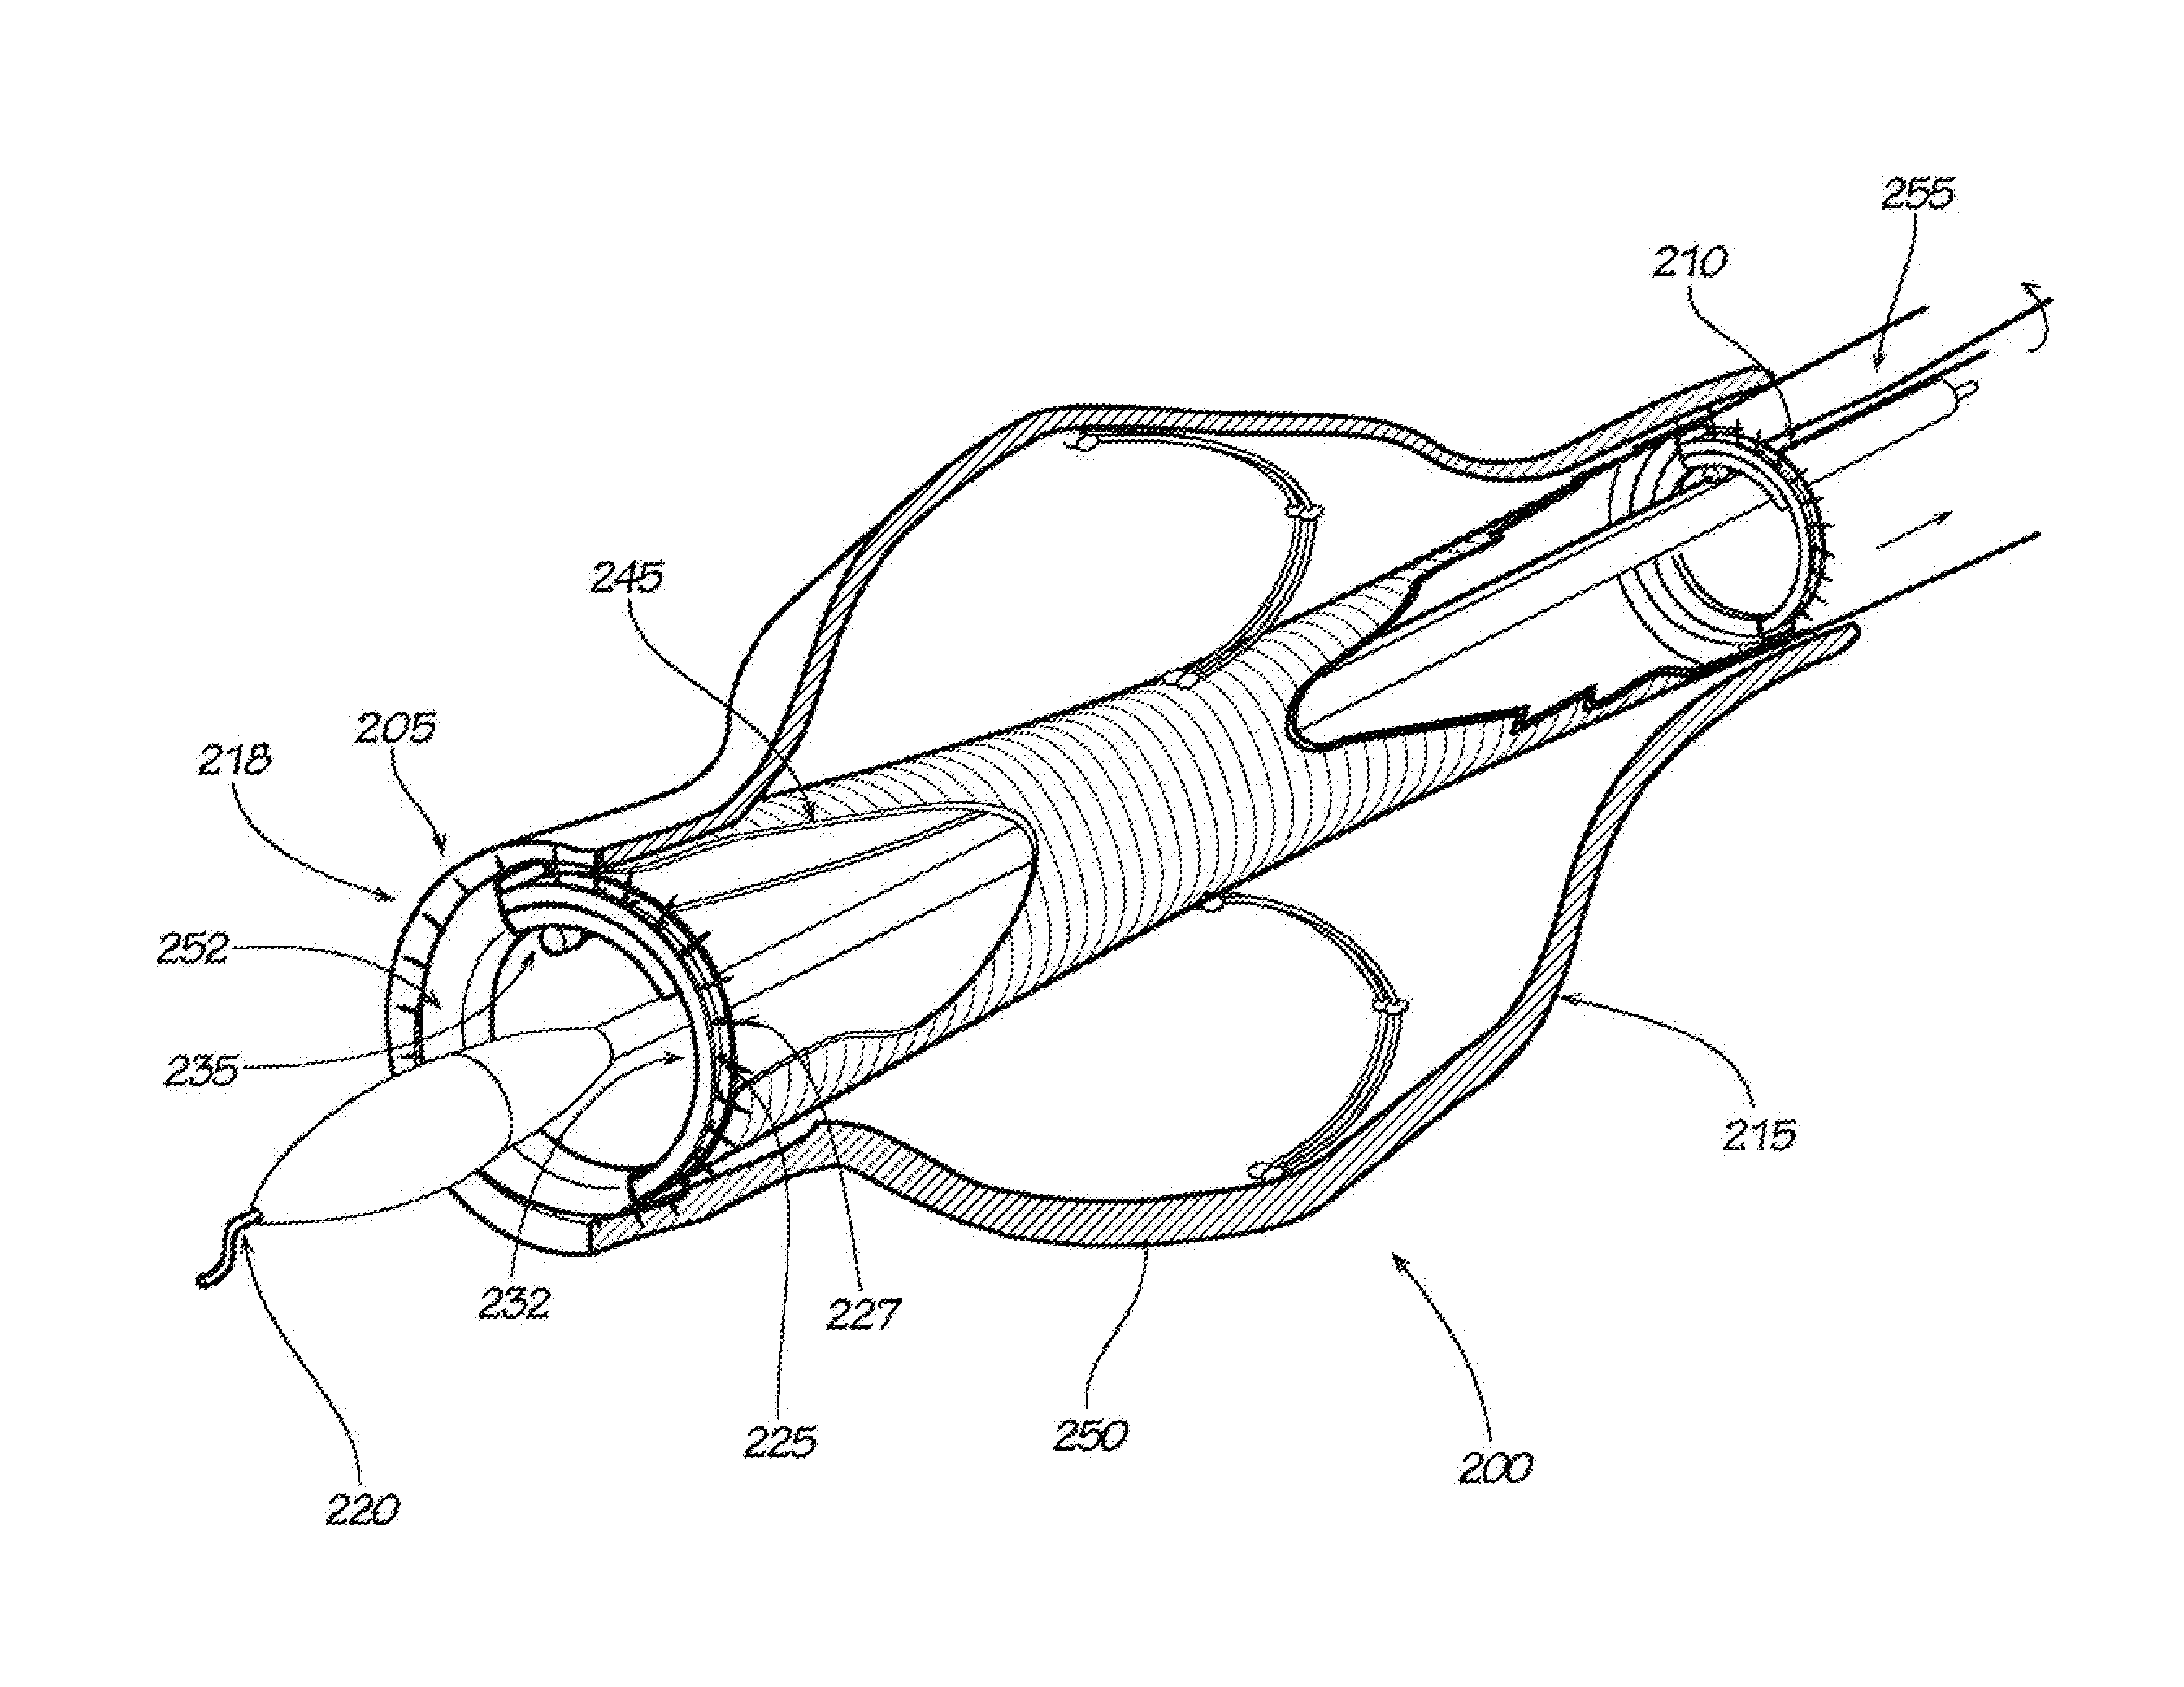 Surgical Implant Devices and Methods for their Manufacture and Use